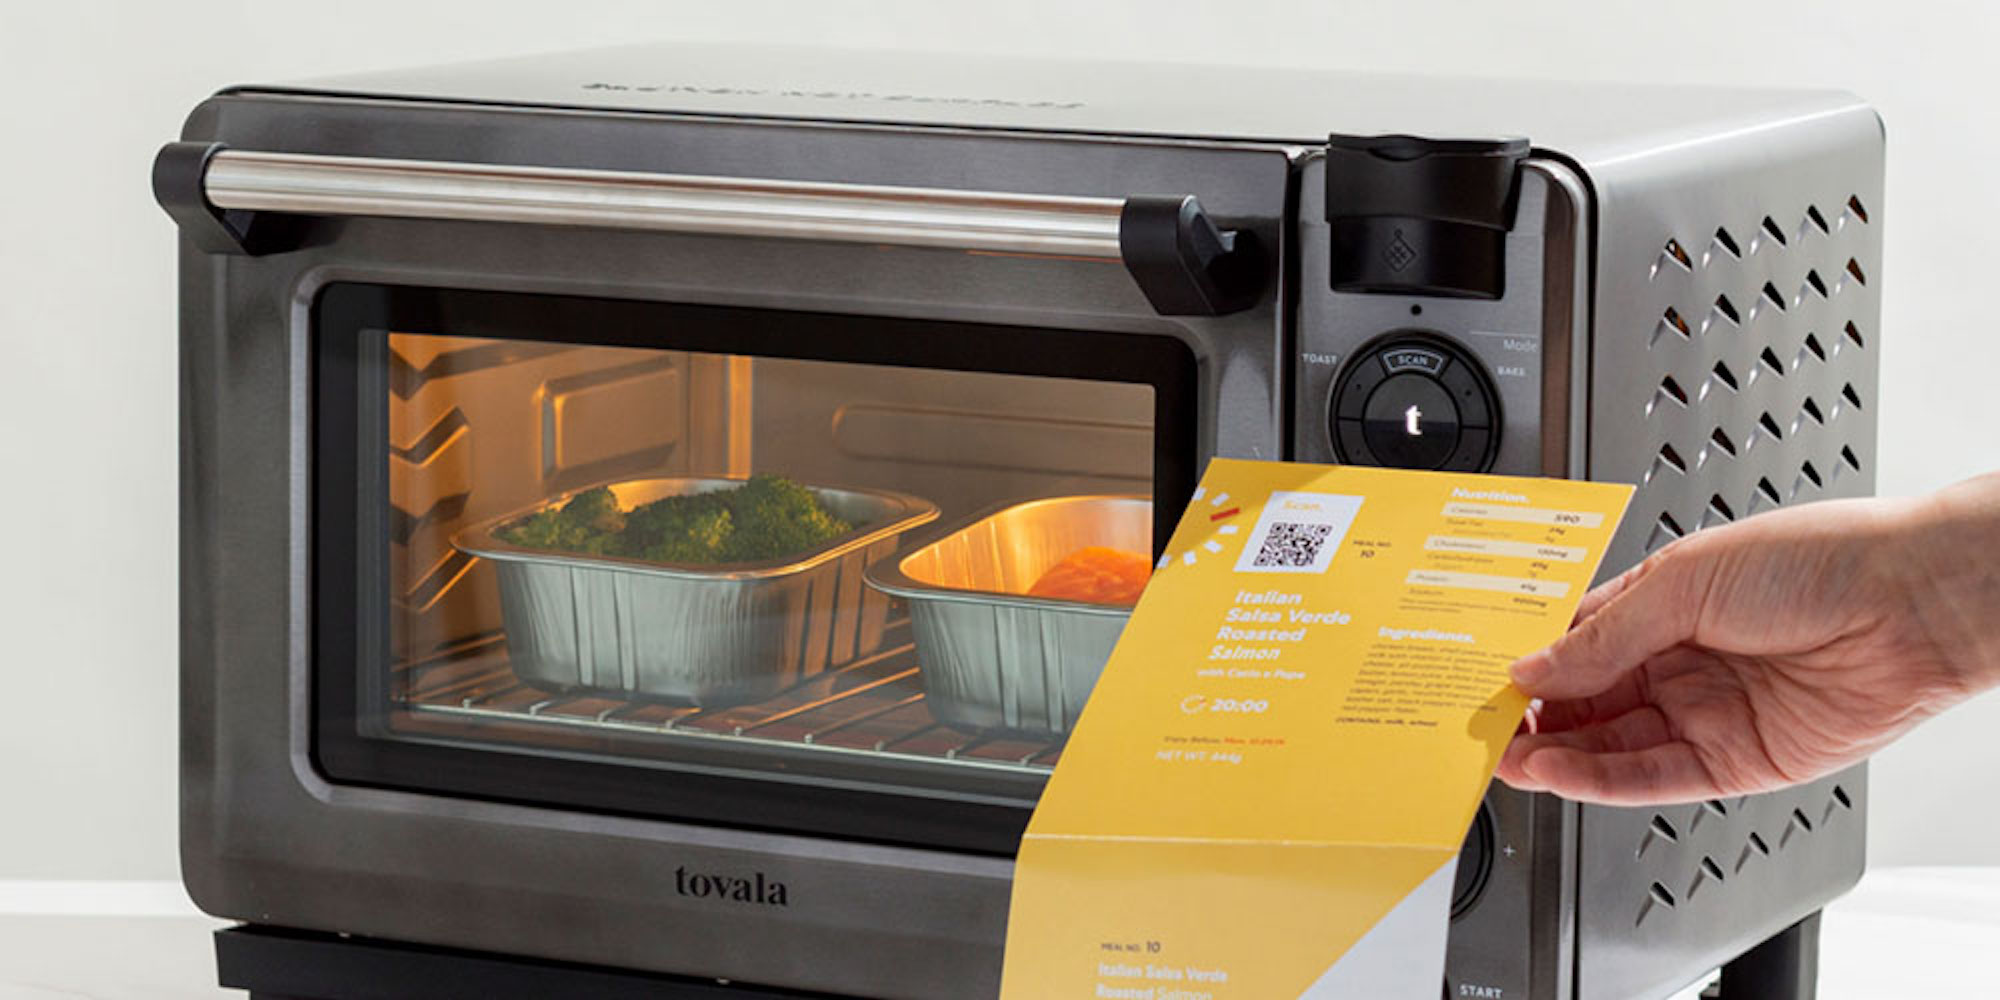 Cook meals easily with the Tovala Smart Oven and Meal Delivery for $233